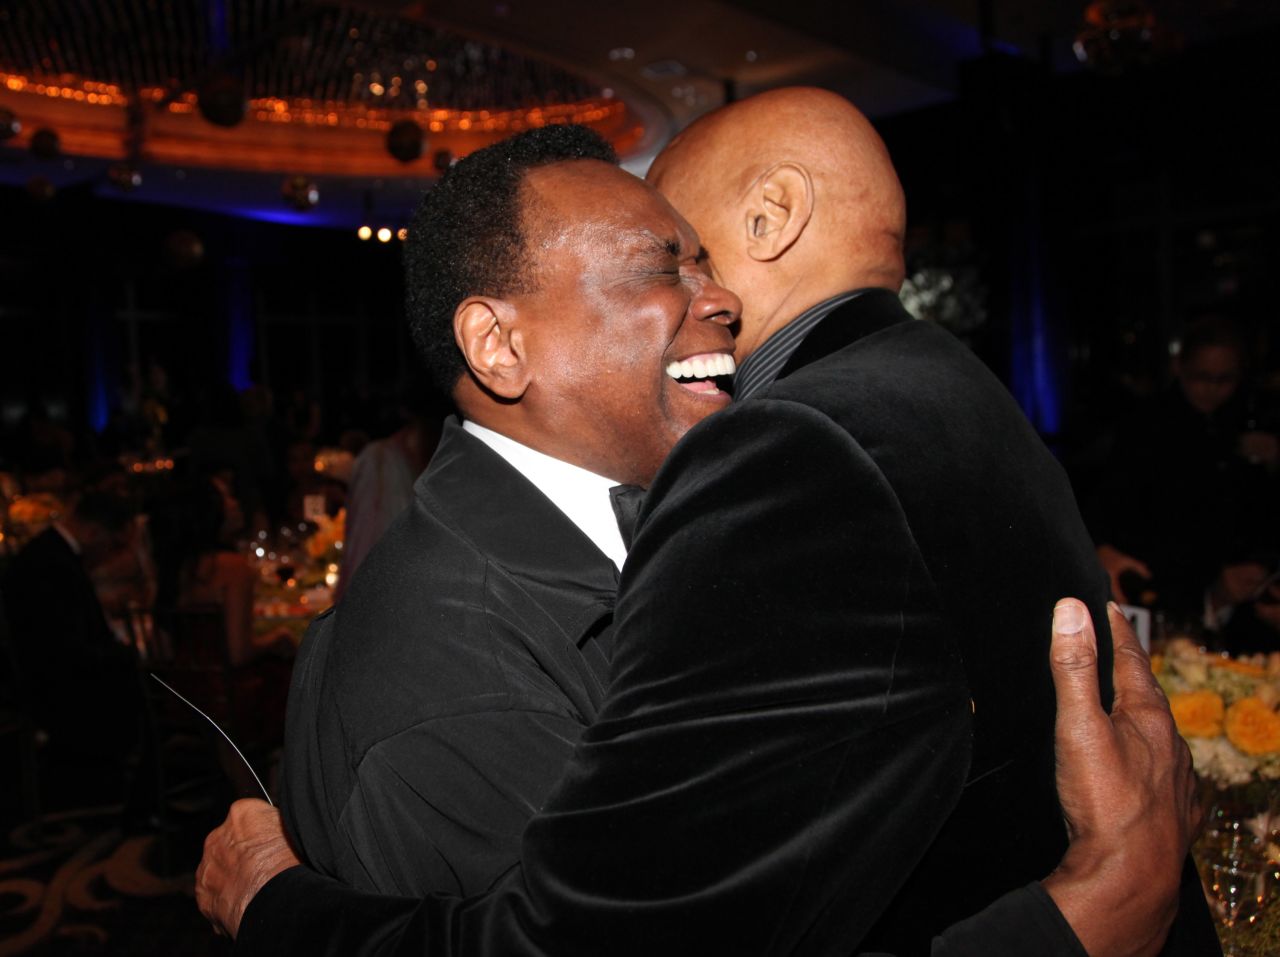 Mitchell and singer Harry Belafonte hug at a Dance Theatre of Harlem gala in 2012.